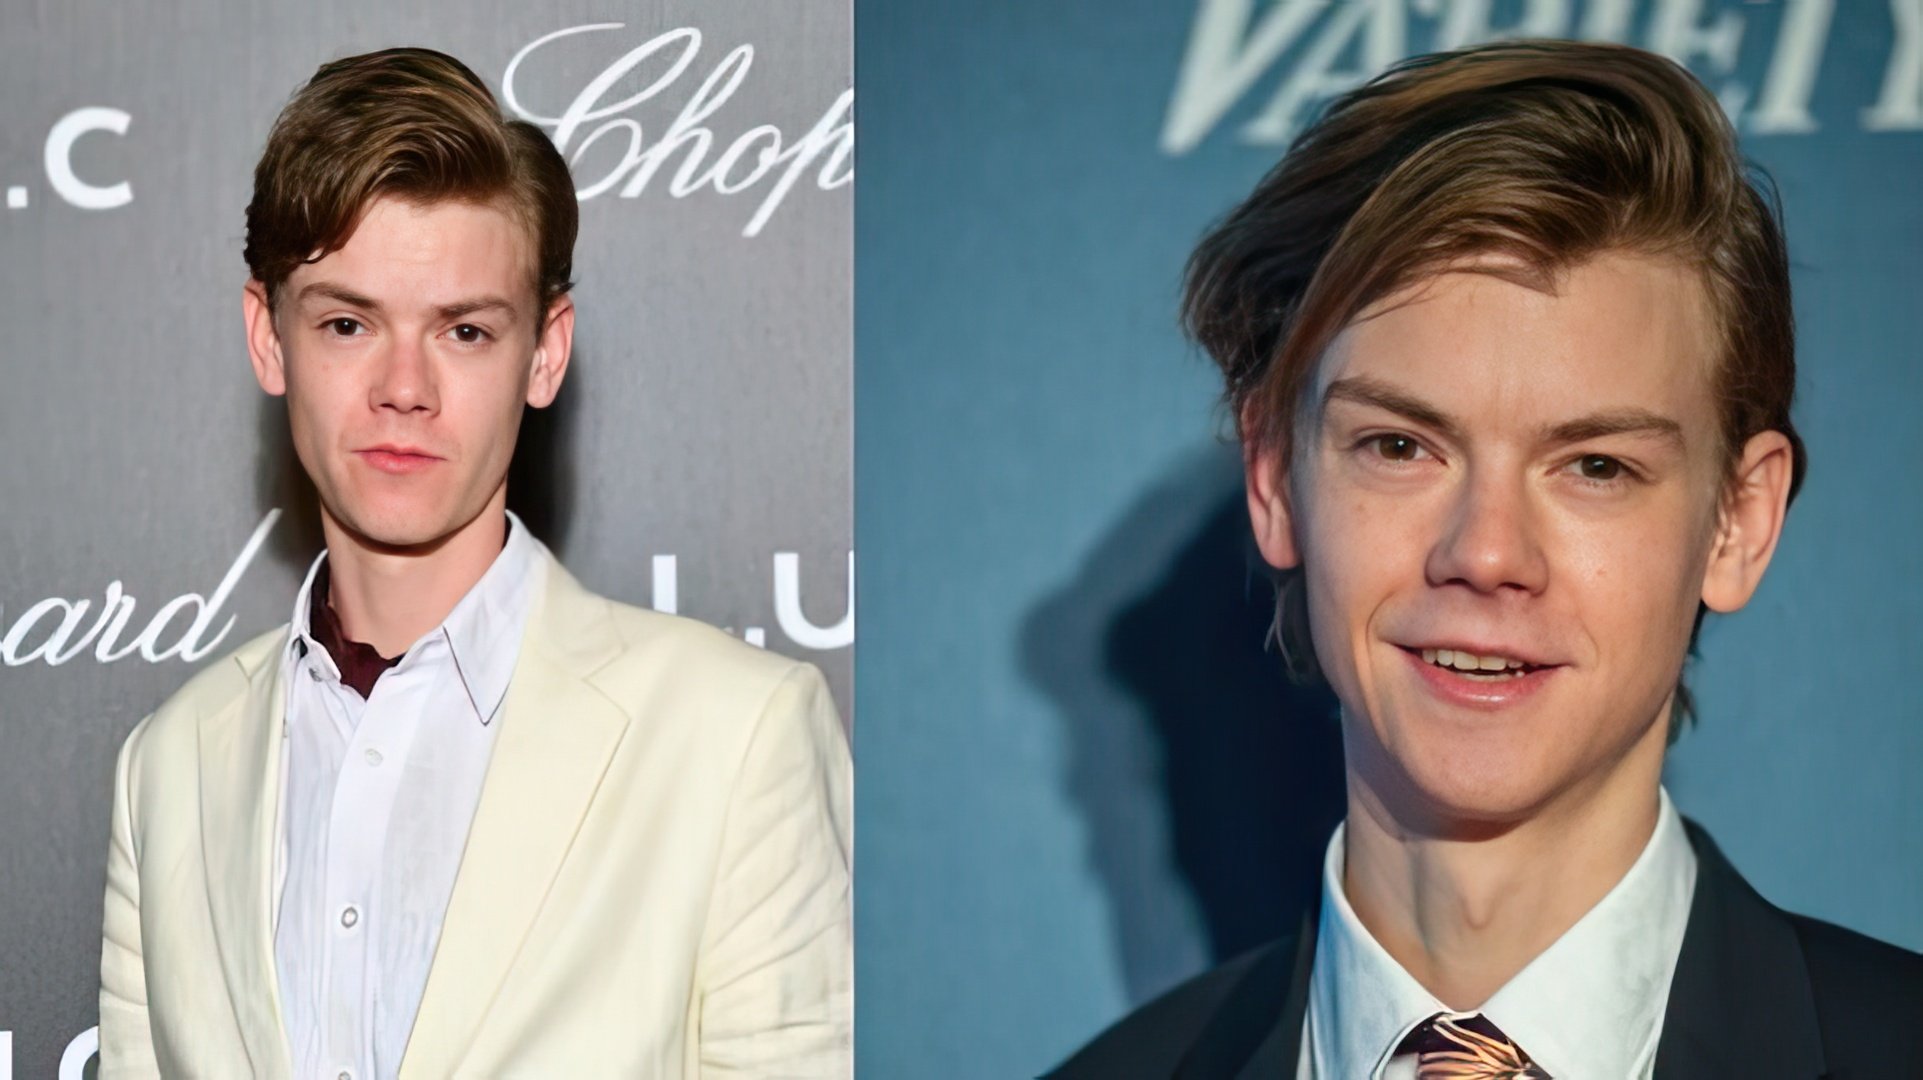 Thomas Sangster looks very younger than he is